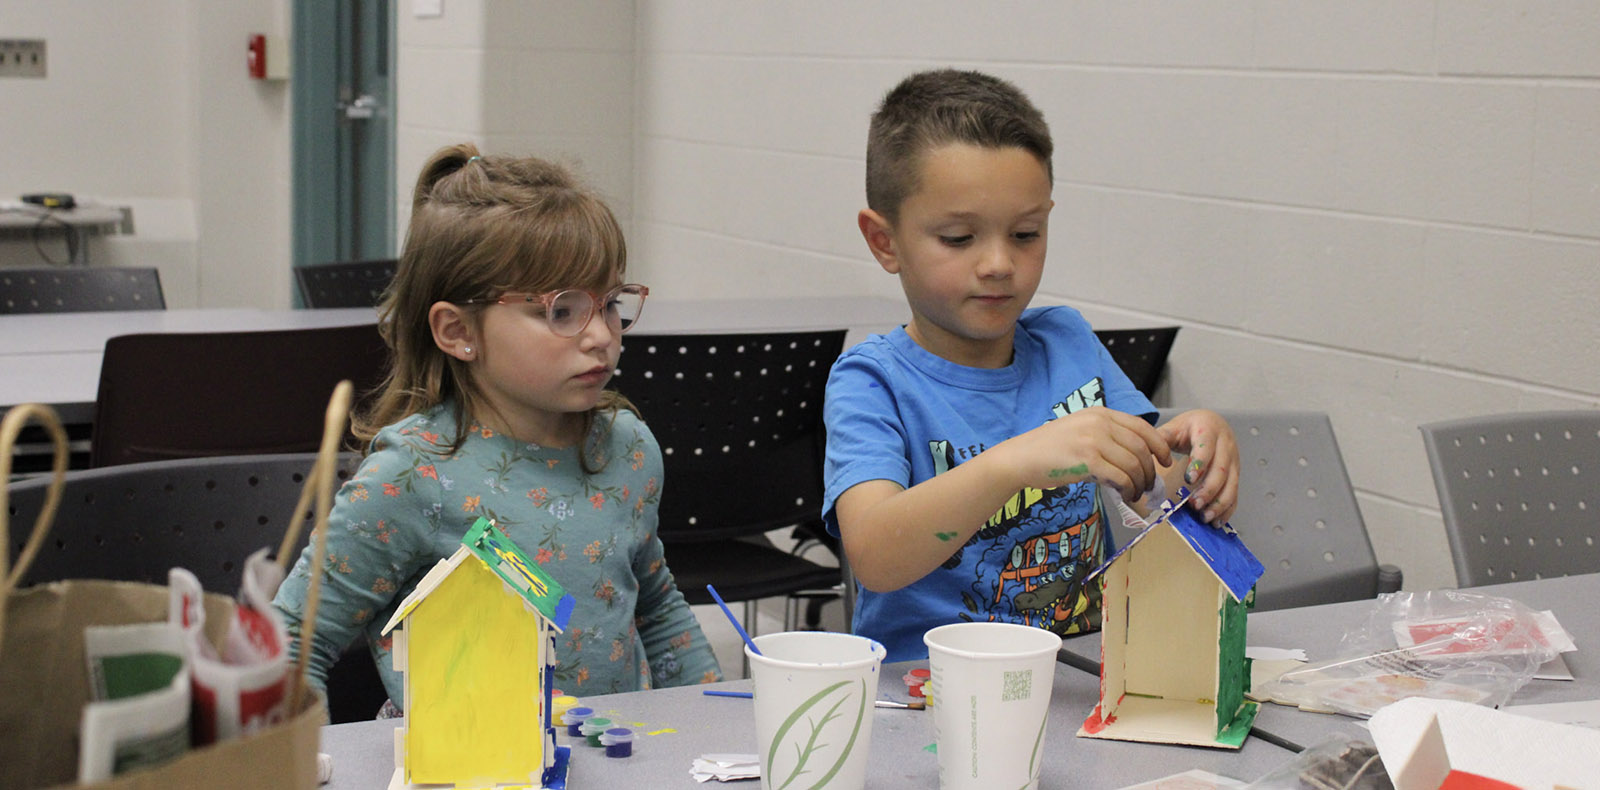 Two kids concentrating on a STEM activity at a table